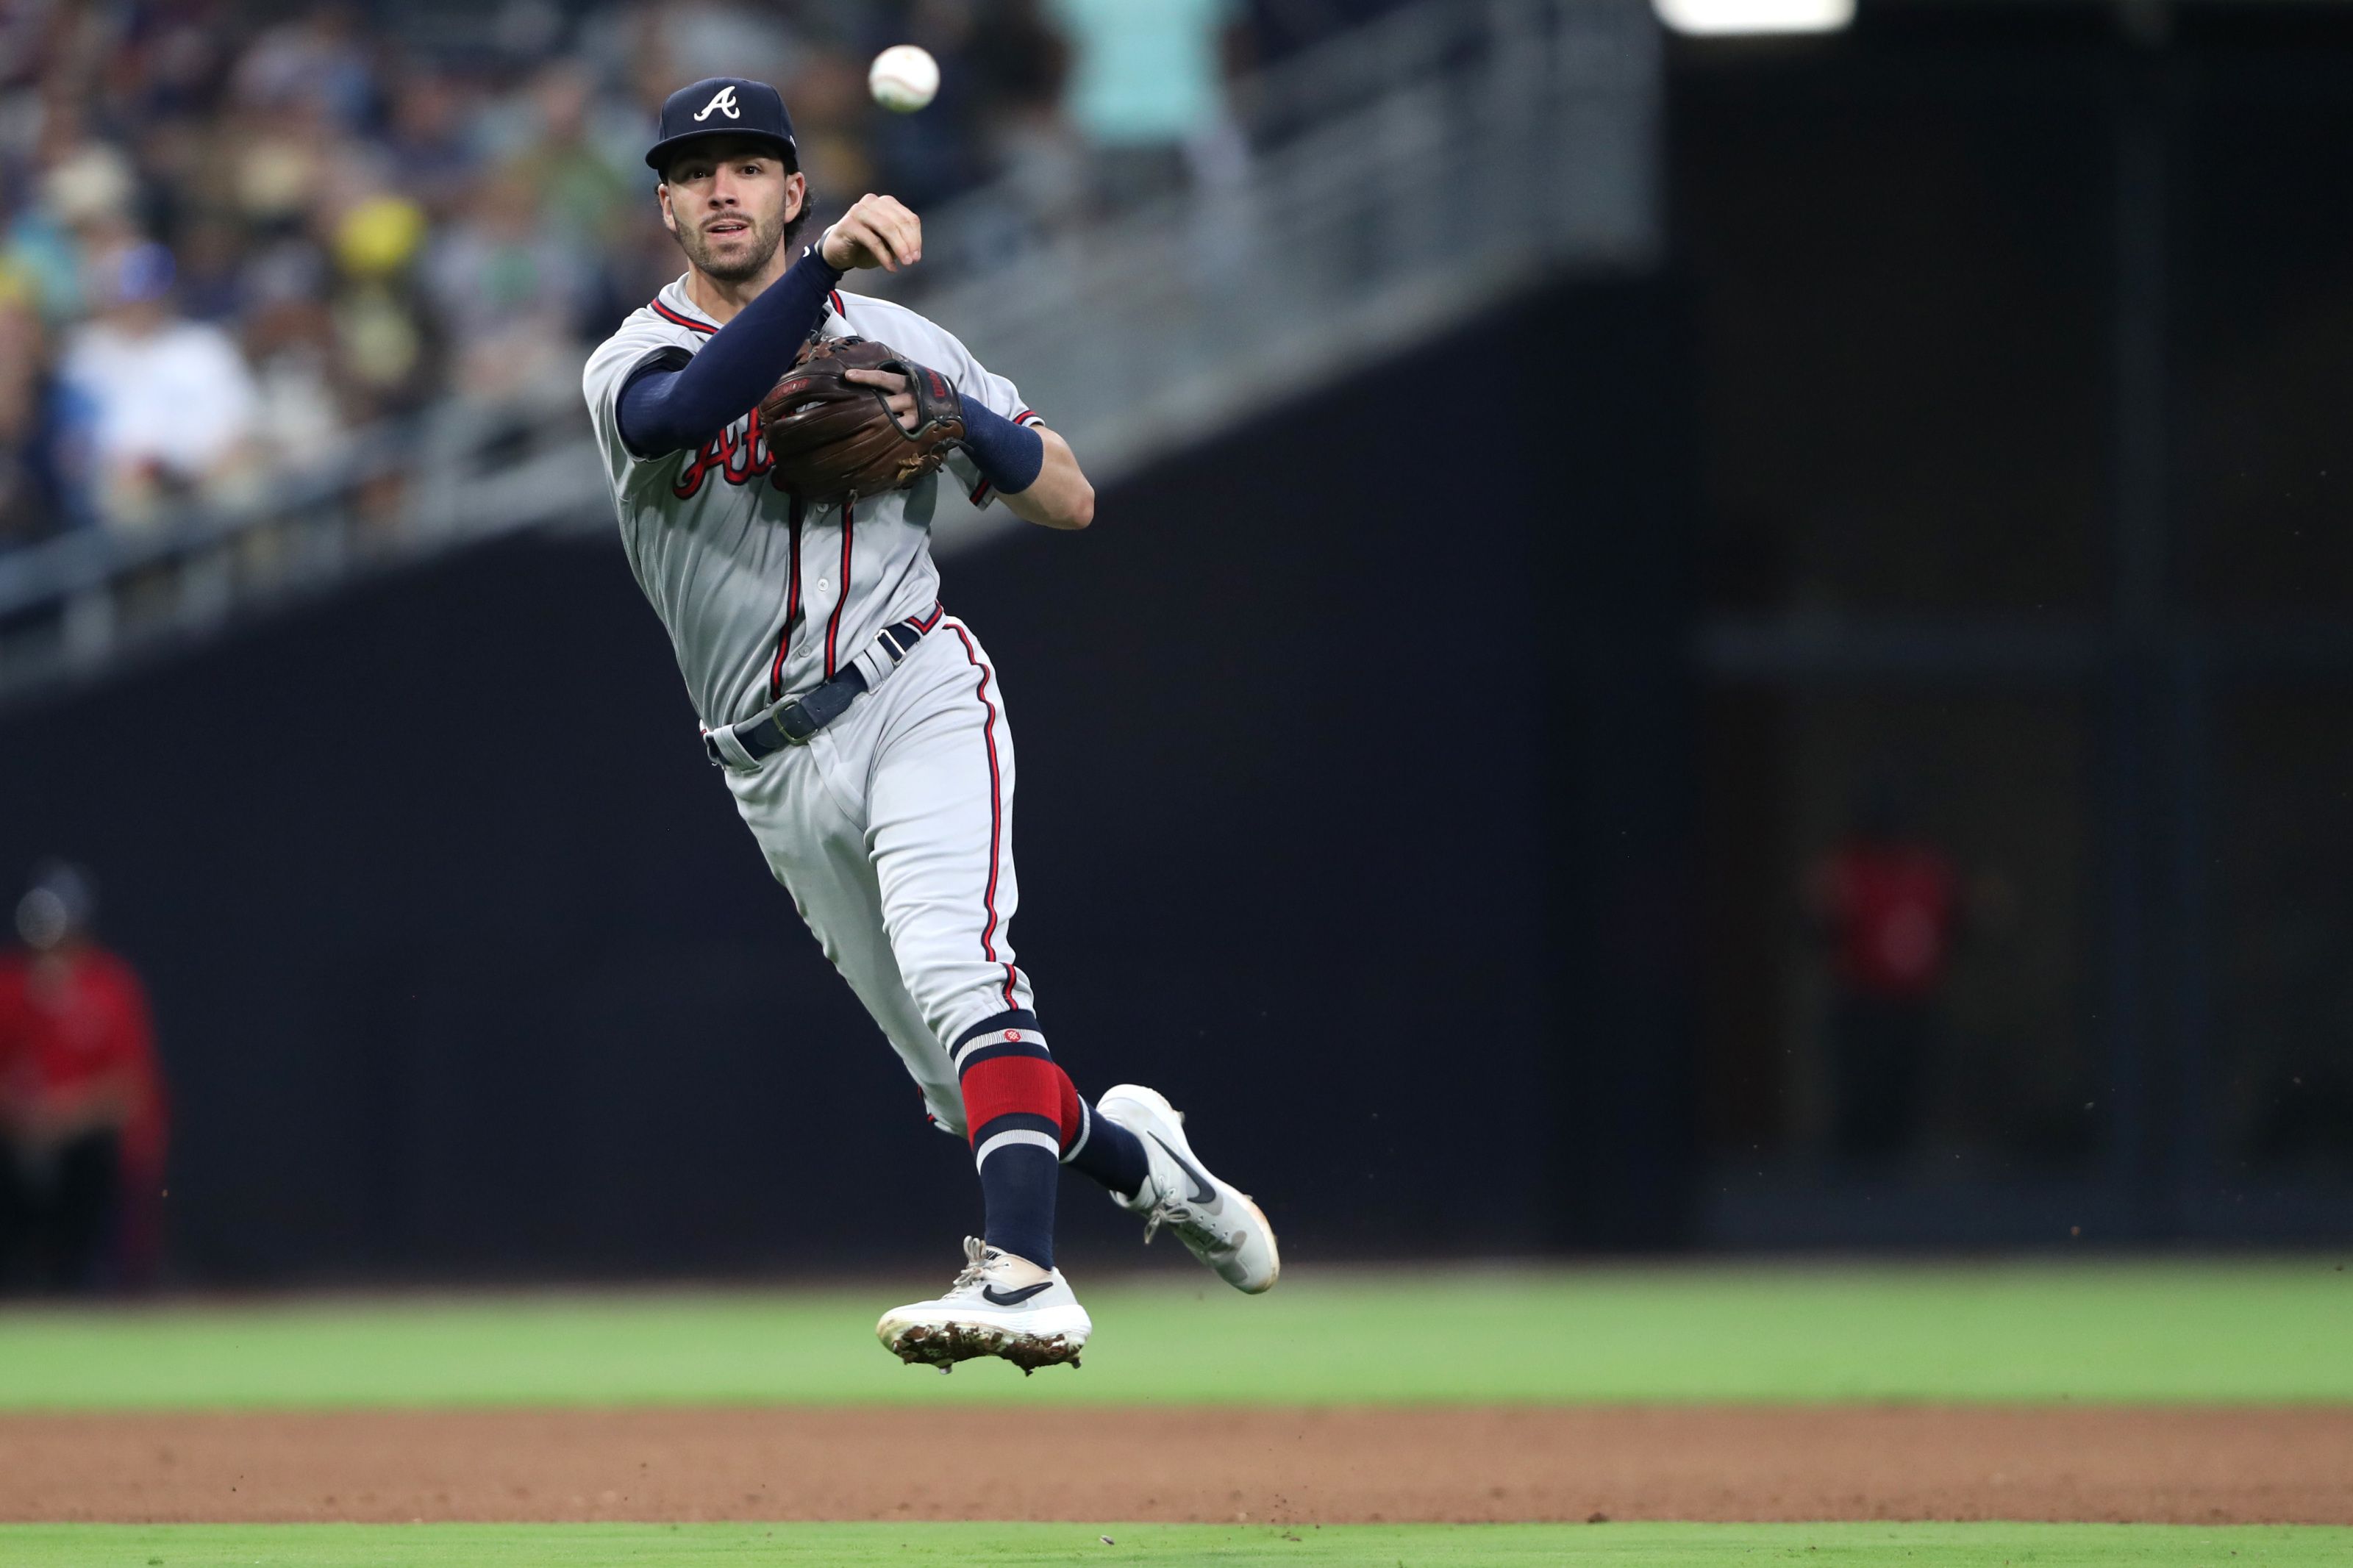 Cubs Dansby Swansons overlooked tool revealed by Freddie Freeman